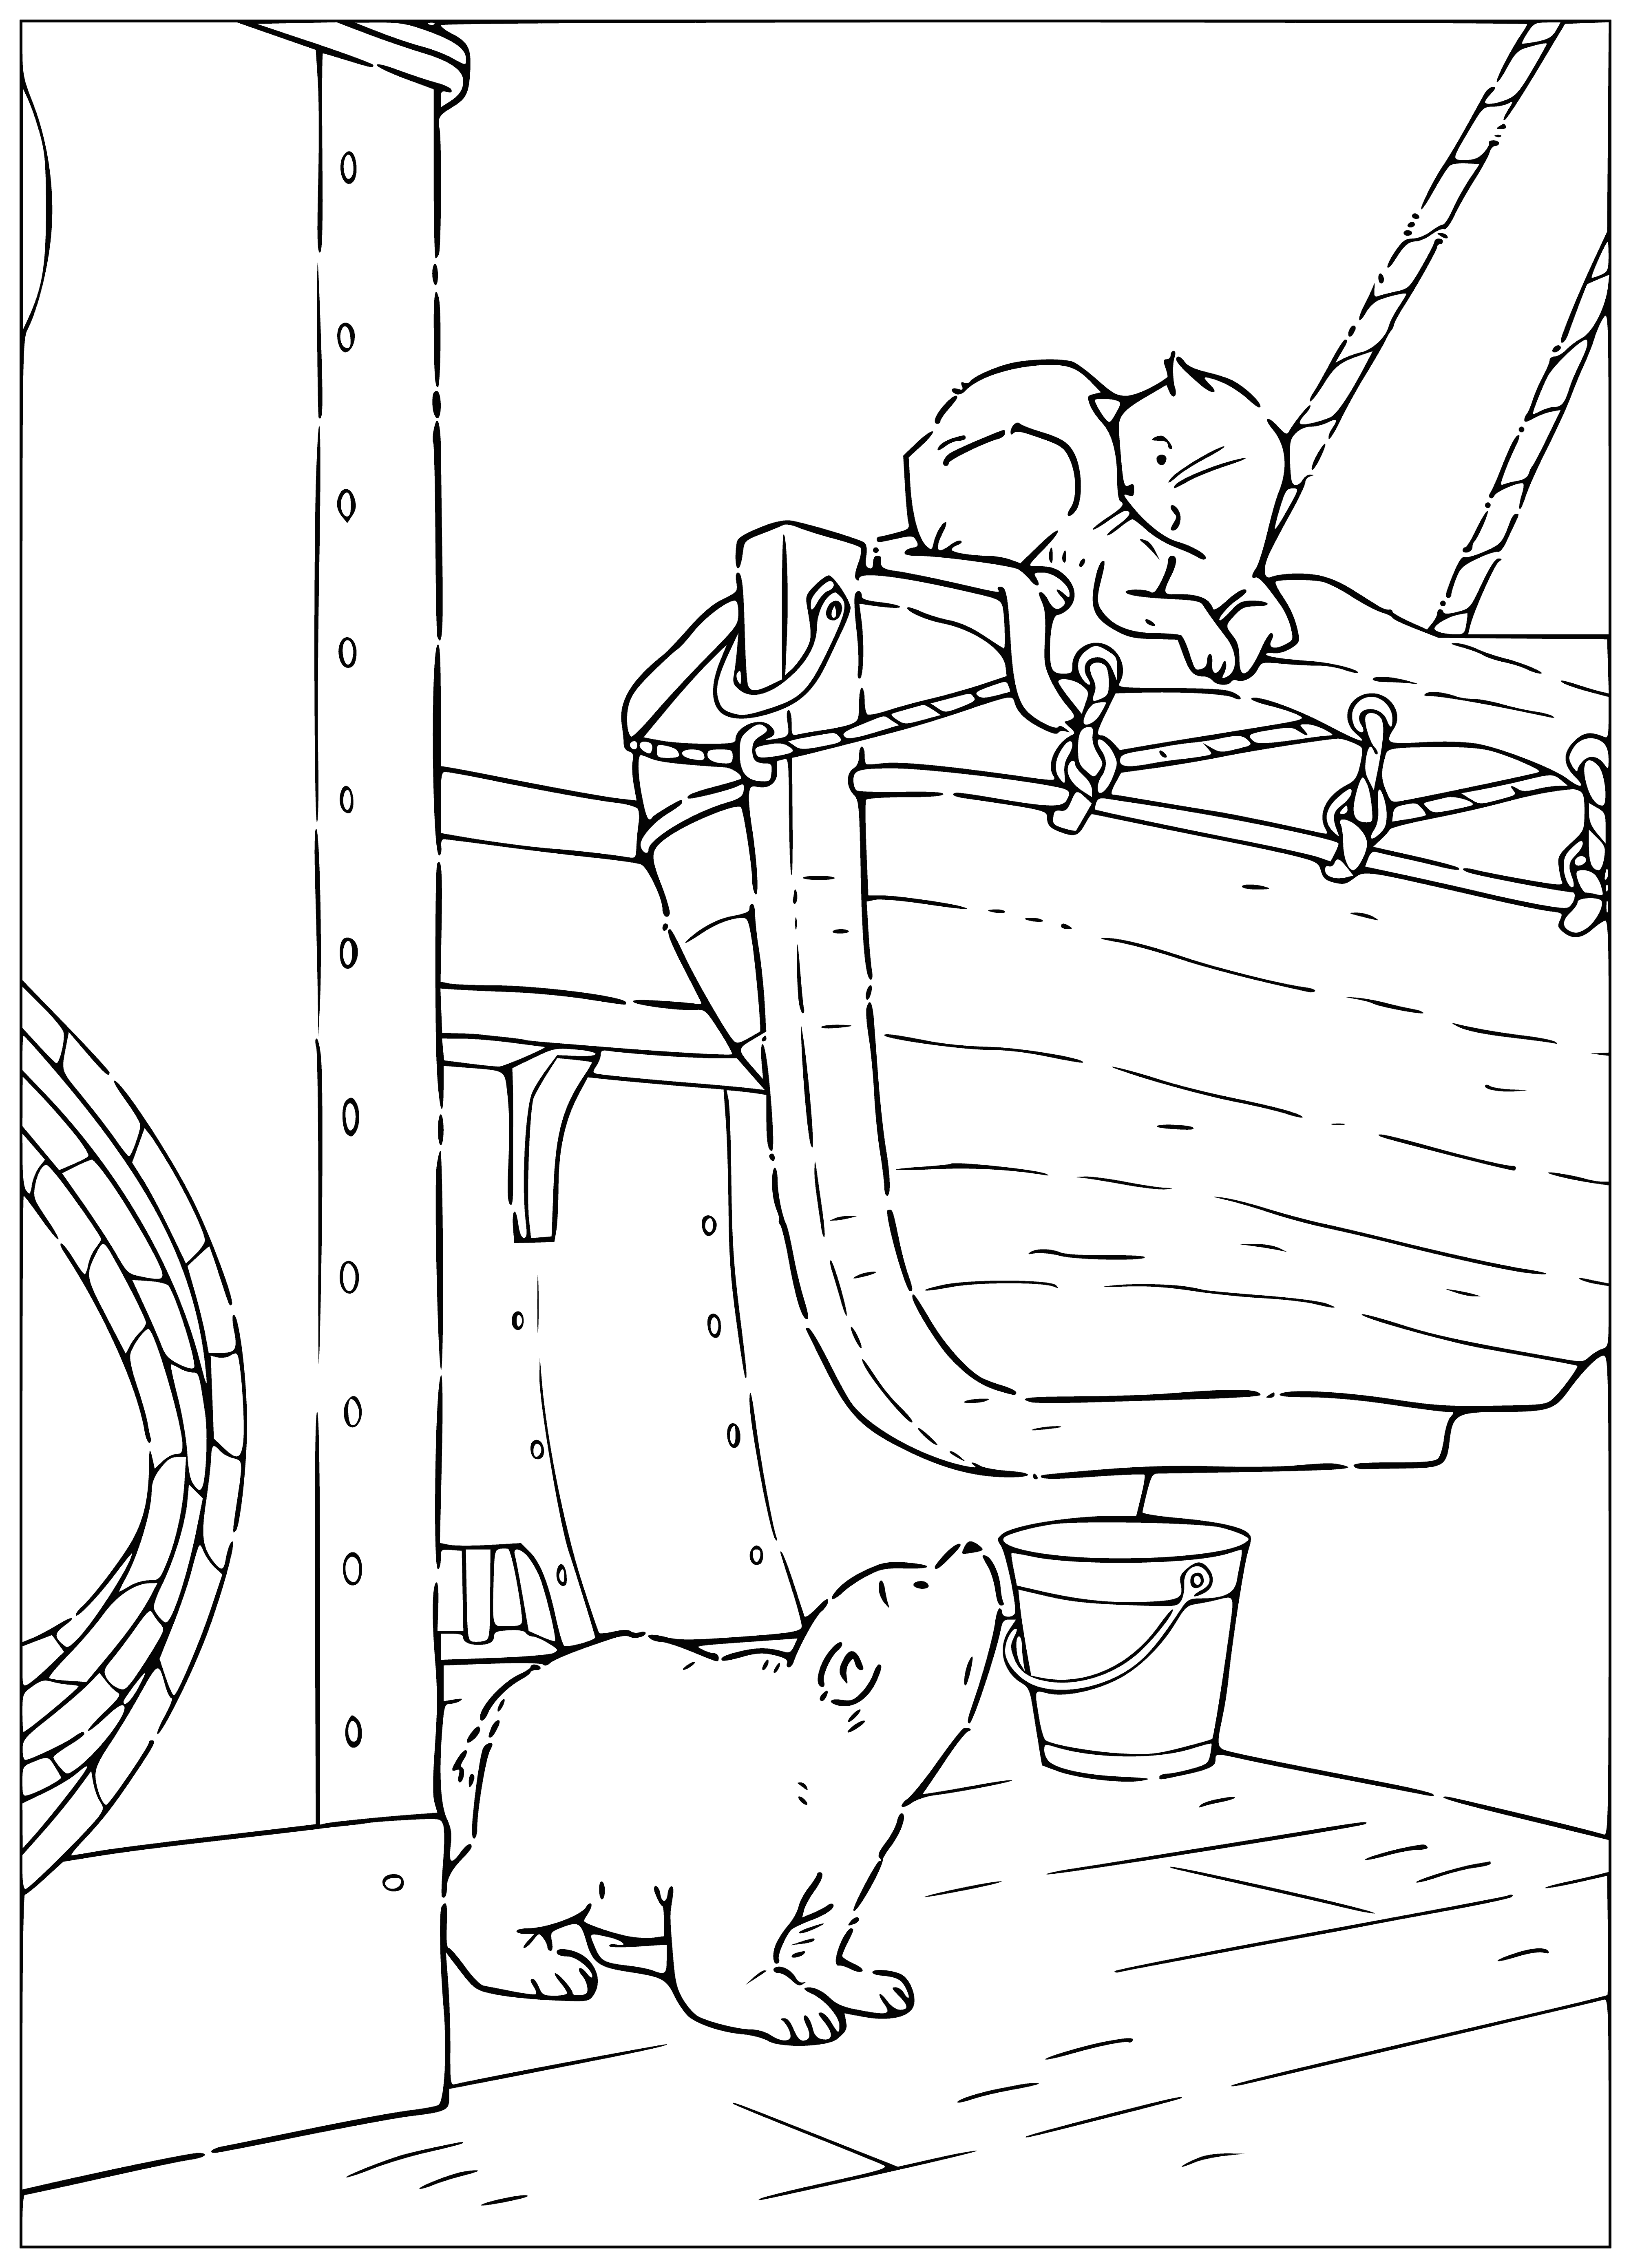 coloring page: Polar bear on blue ship in water: white & blue amidst the calm sea.